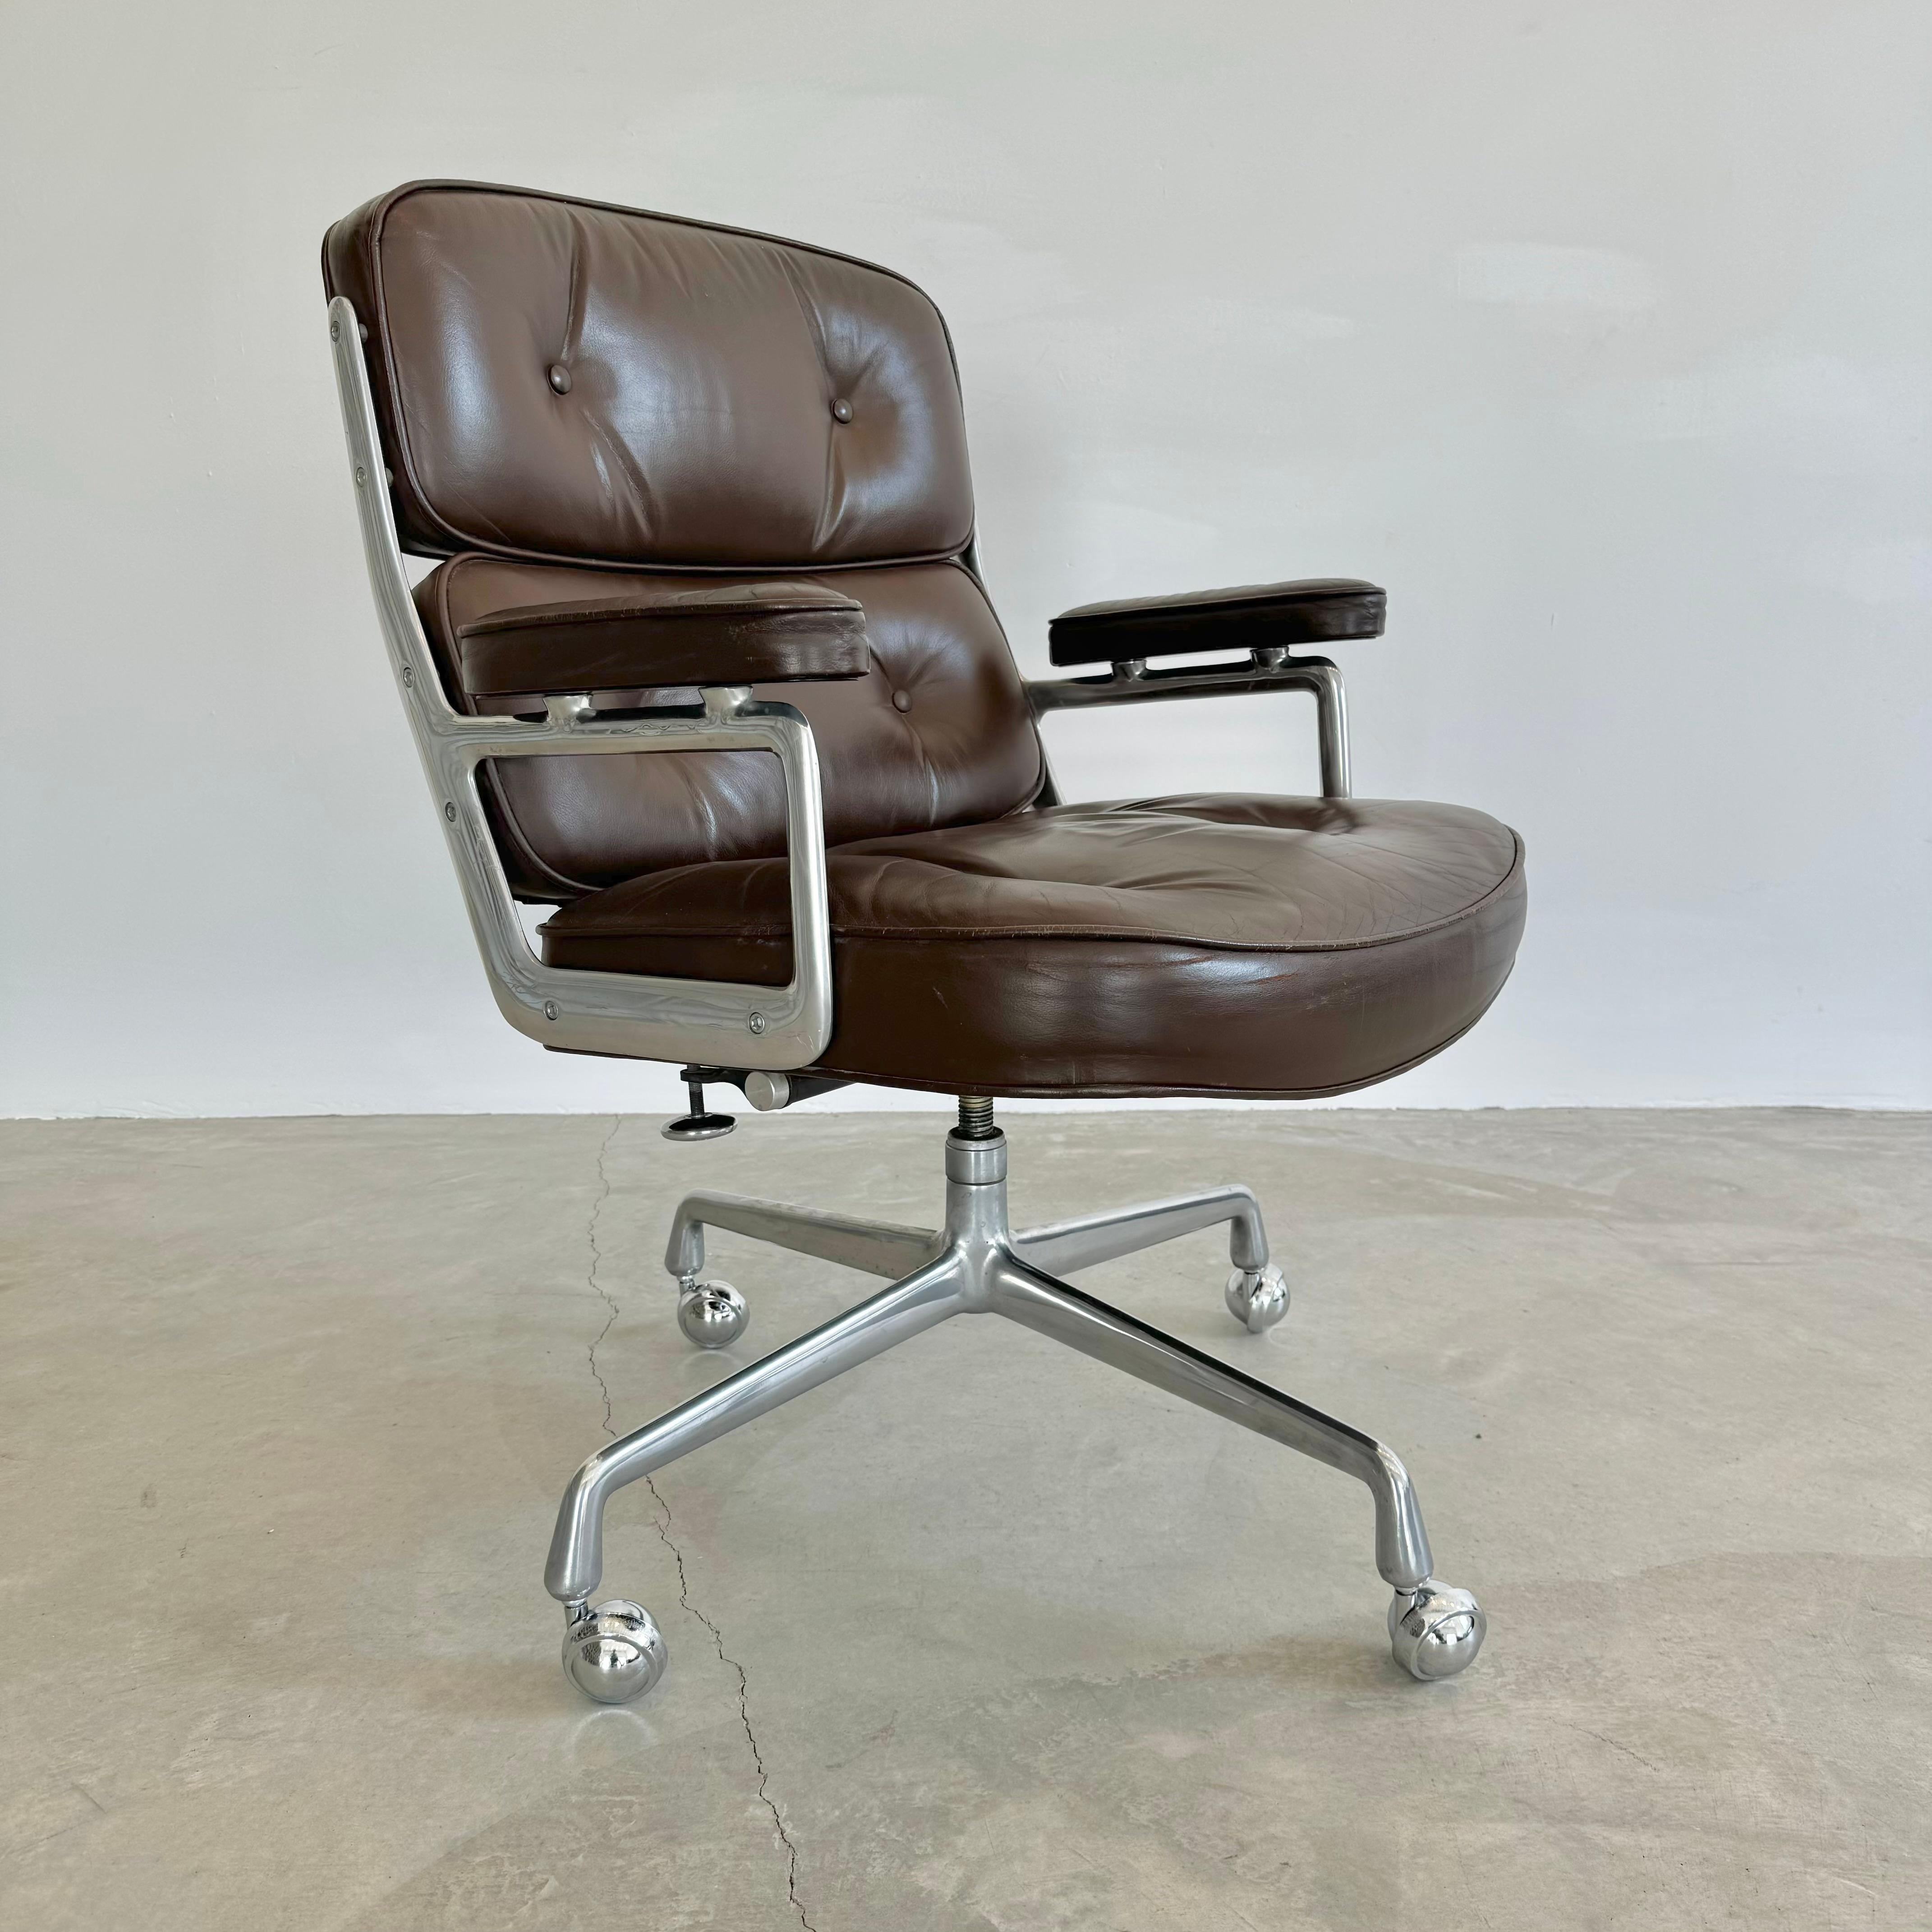 Late 20th Century Eames Time Life Chair in Chocolate Leather for Herman Miller, 1978 USA For Sale